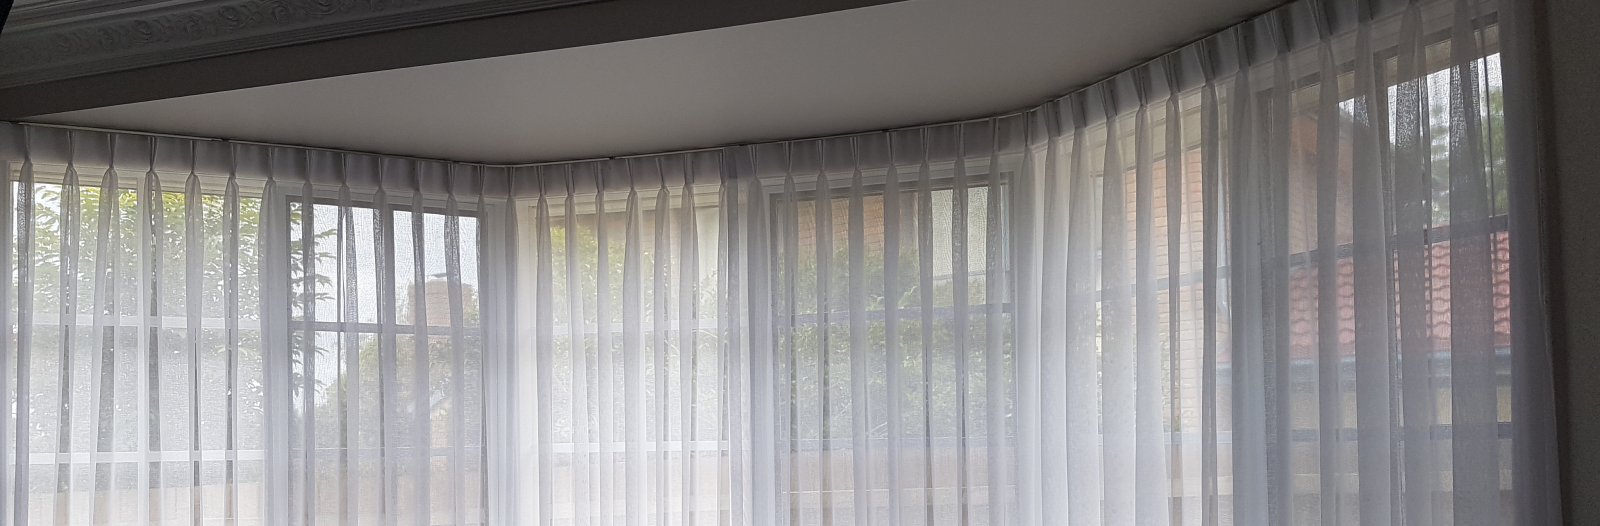 Sheers, Curtains and Drapes Melbourne